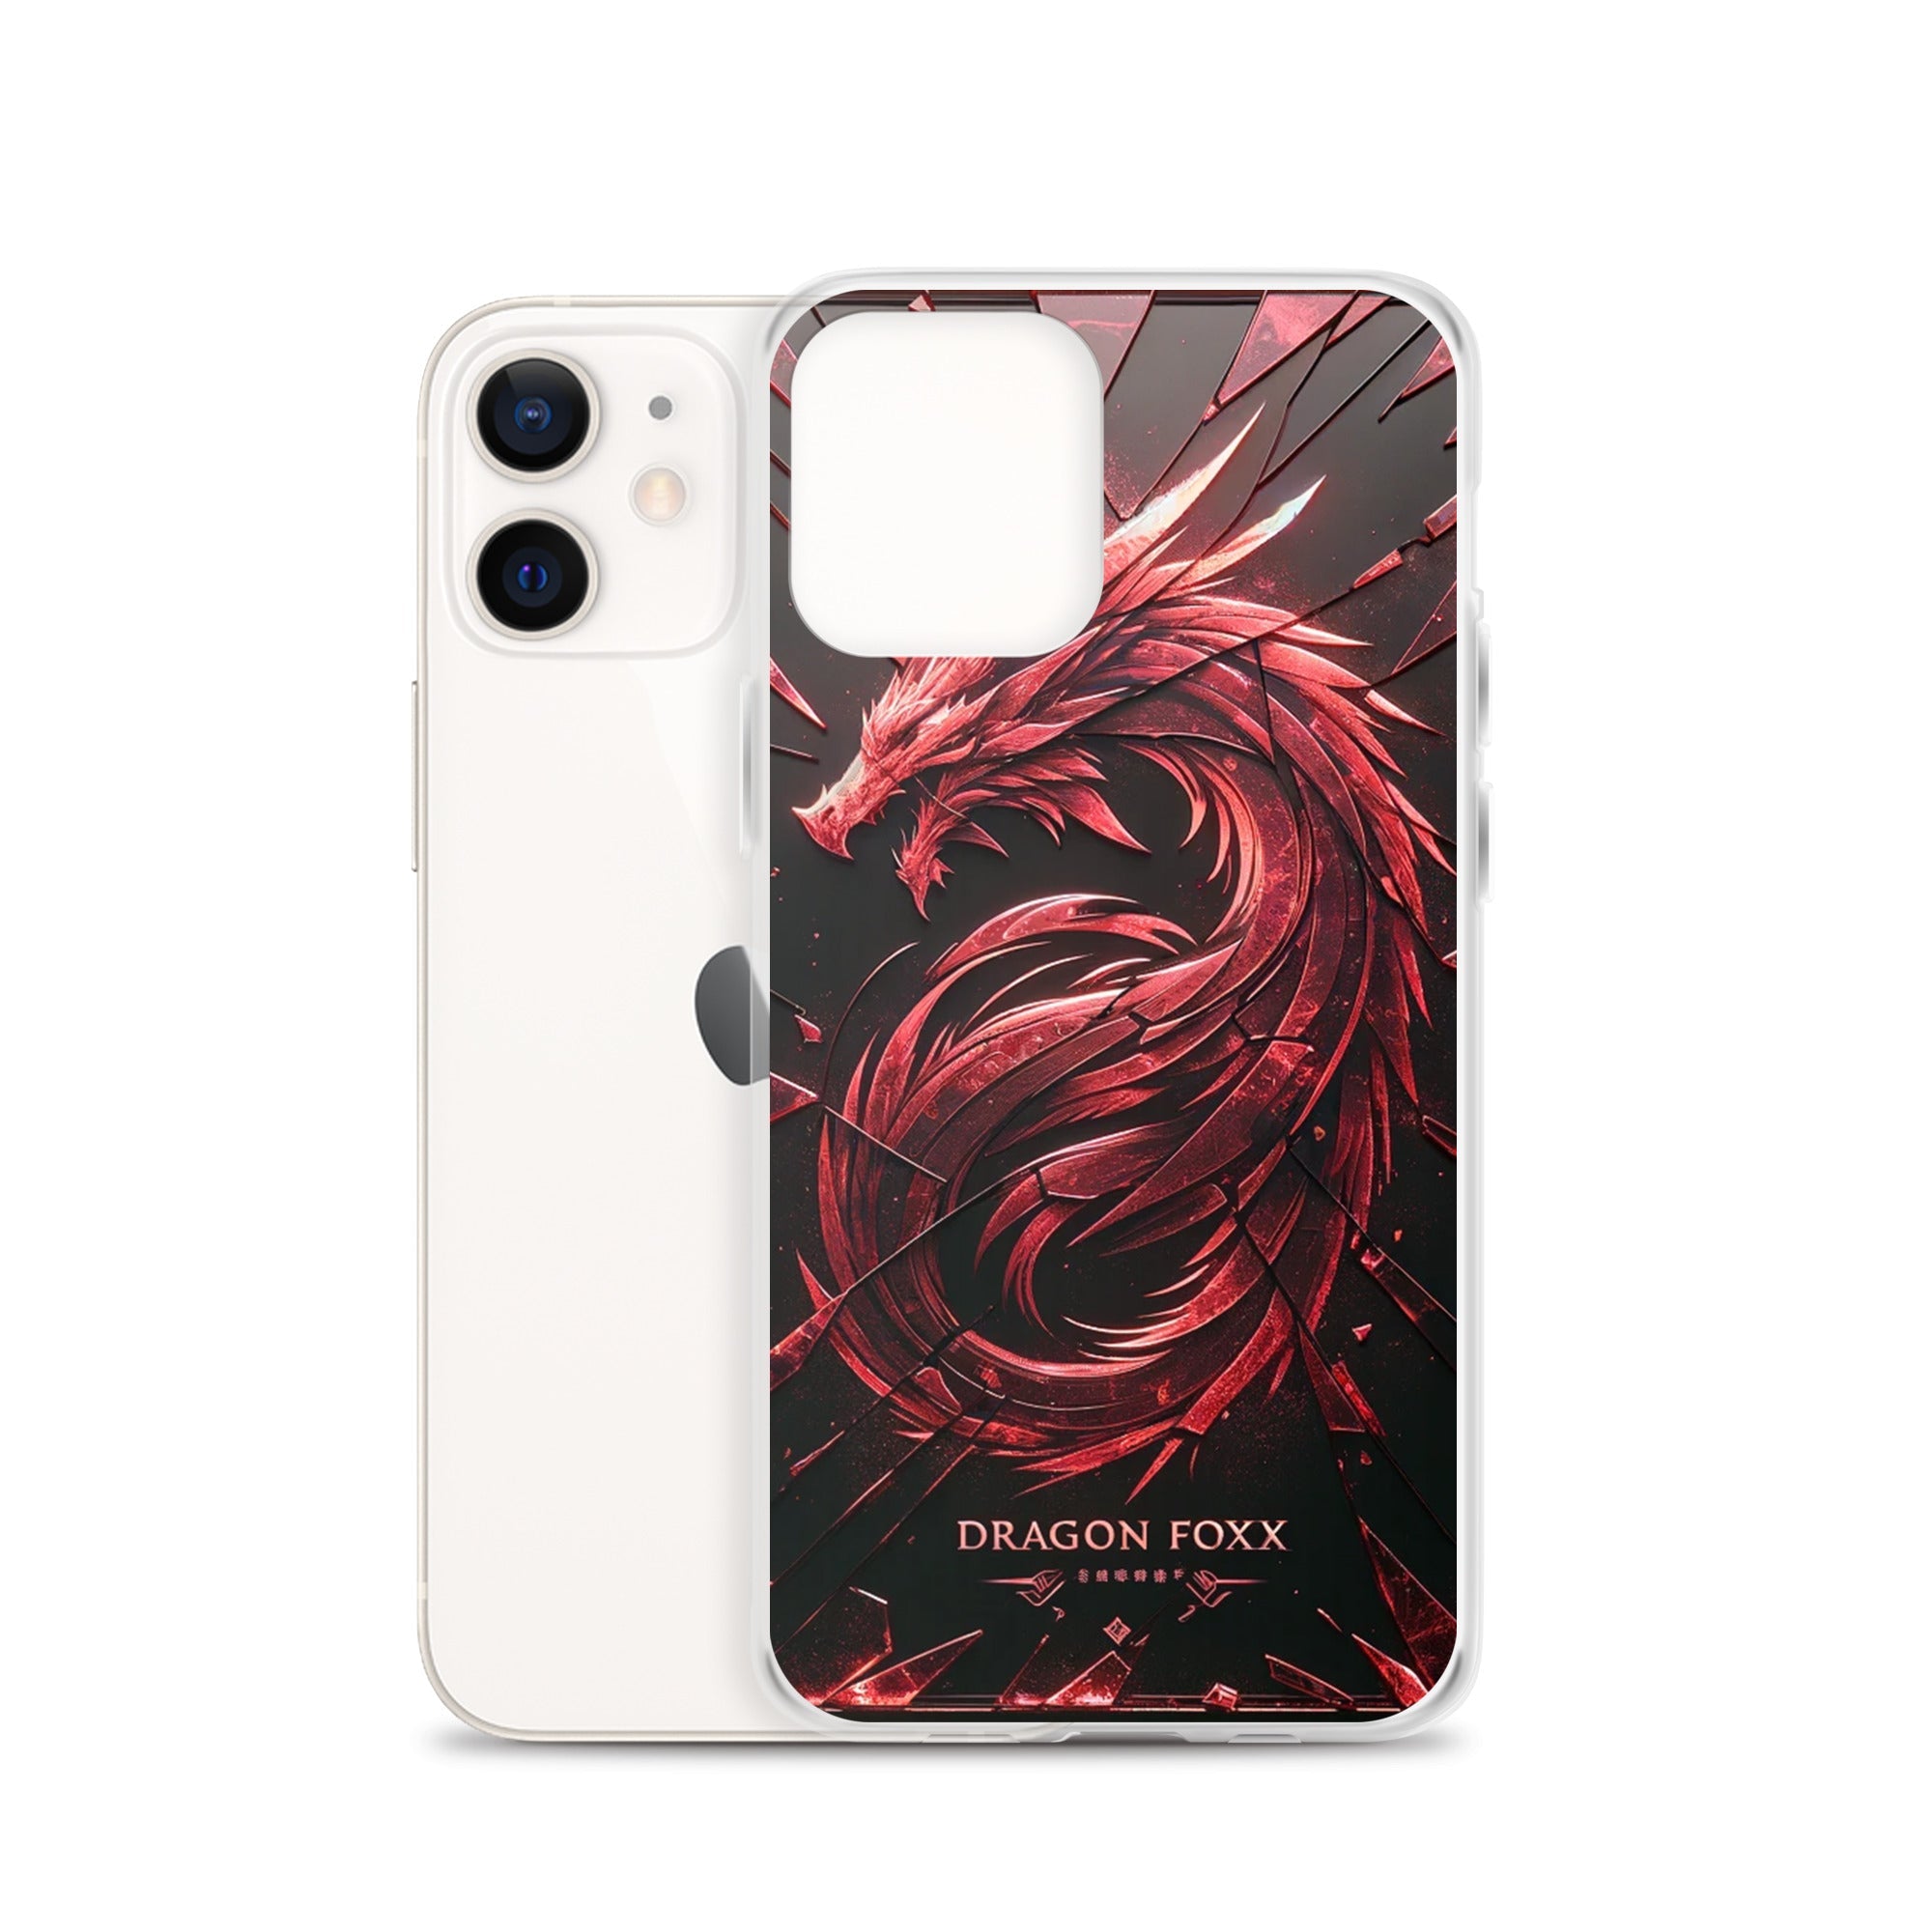 DRAGON FOXX™ Red Dragon Phone Case for iPhone® - Phone Case for iPhone® - DRAGON FOXX™ - DRAGON FOXX™ Red Dragon Phone Case for iPhone® - 7805351_11704 - iPhone 12 - Red/Black/Clear - Accessories - Dragon Foxx™ - DRAGON FOXX™ Phone Case for iPhone®